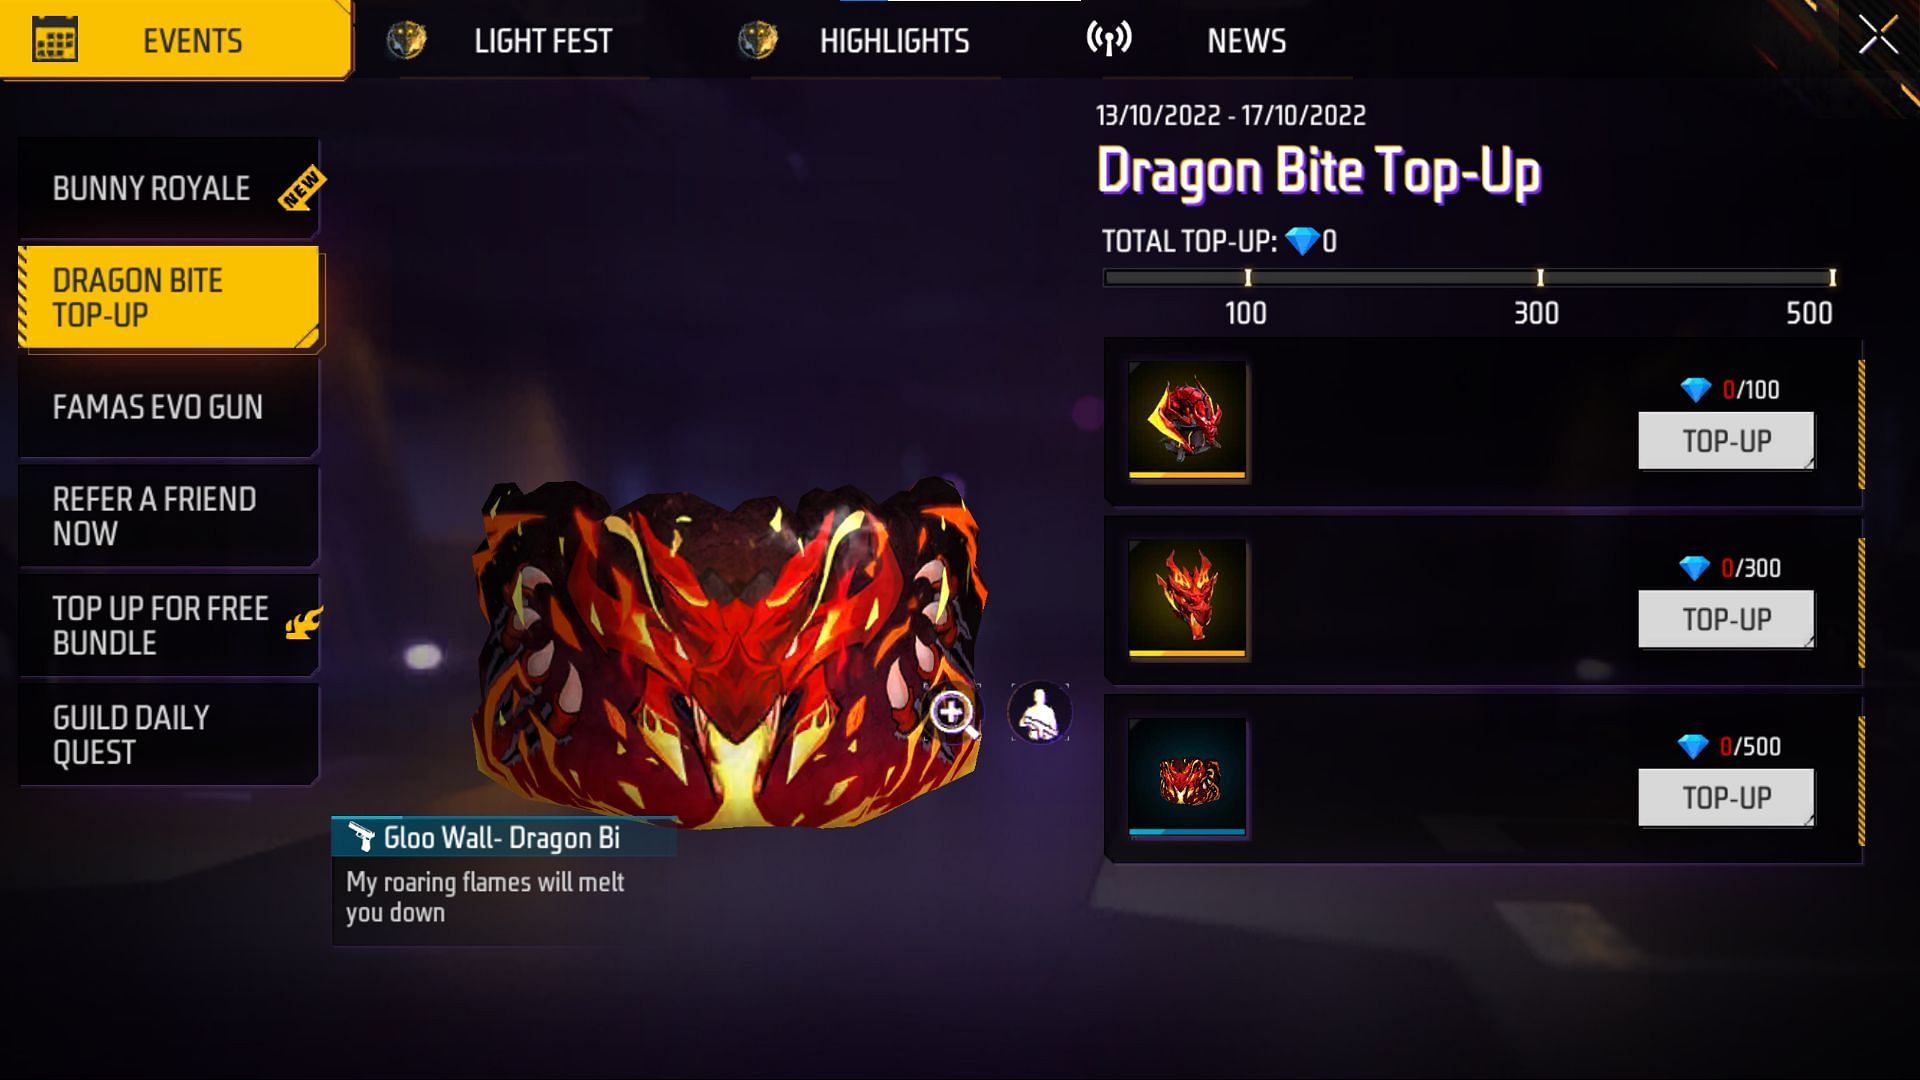 Dragon Bite Top-Up event (Image from Garena)